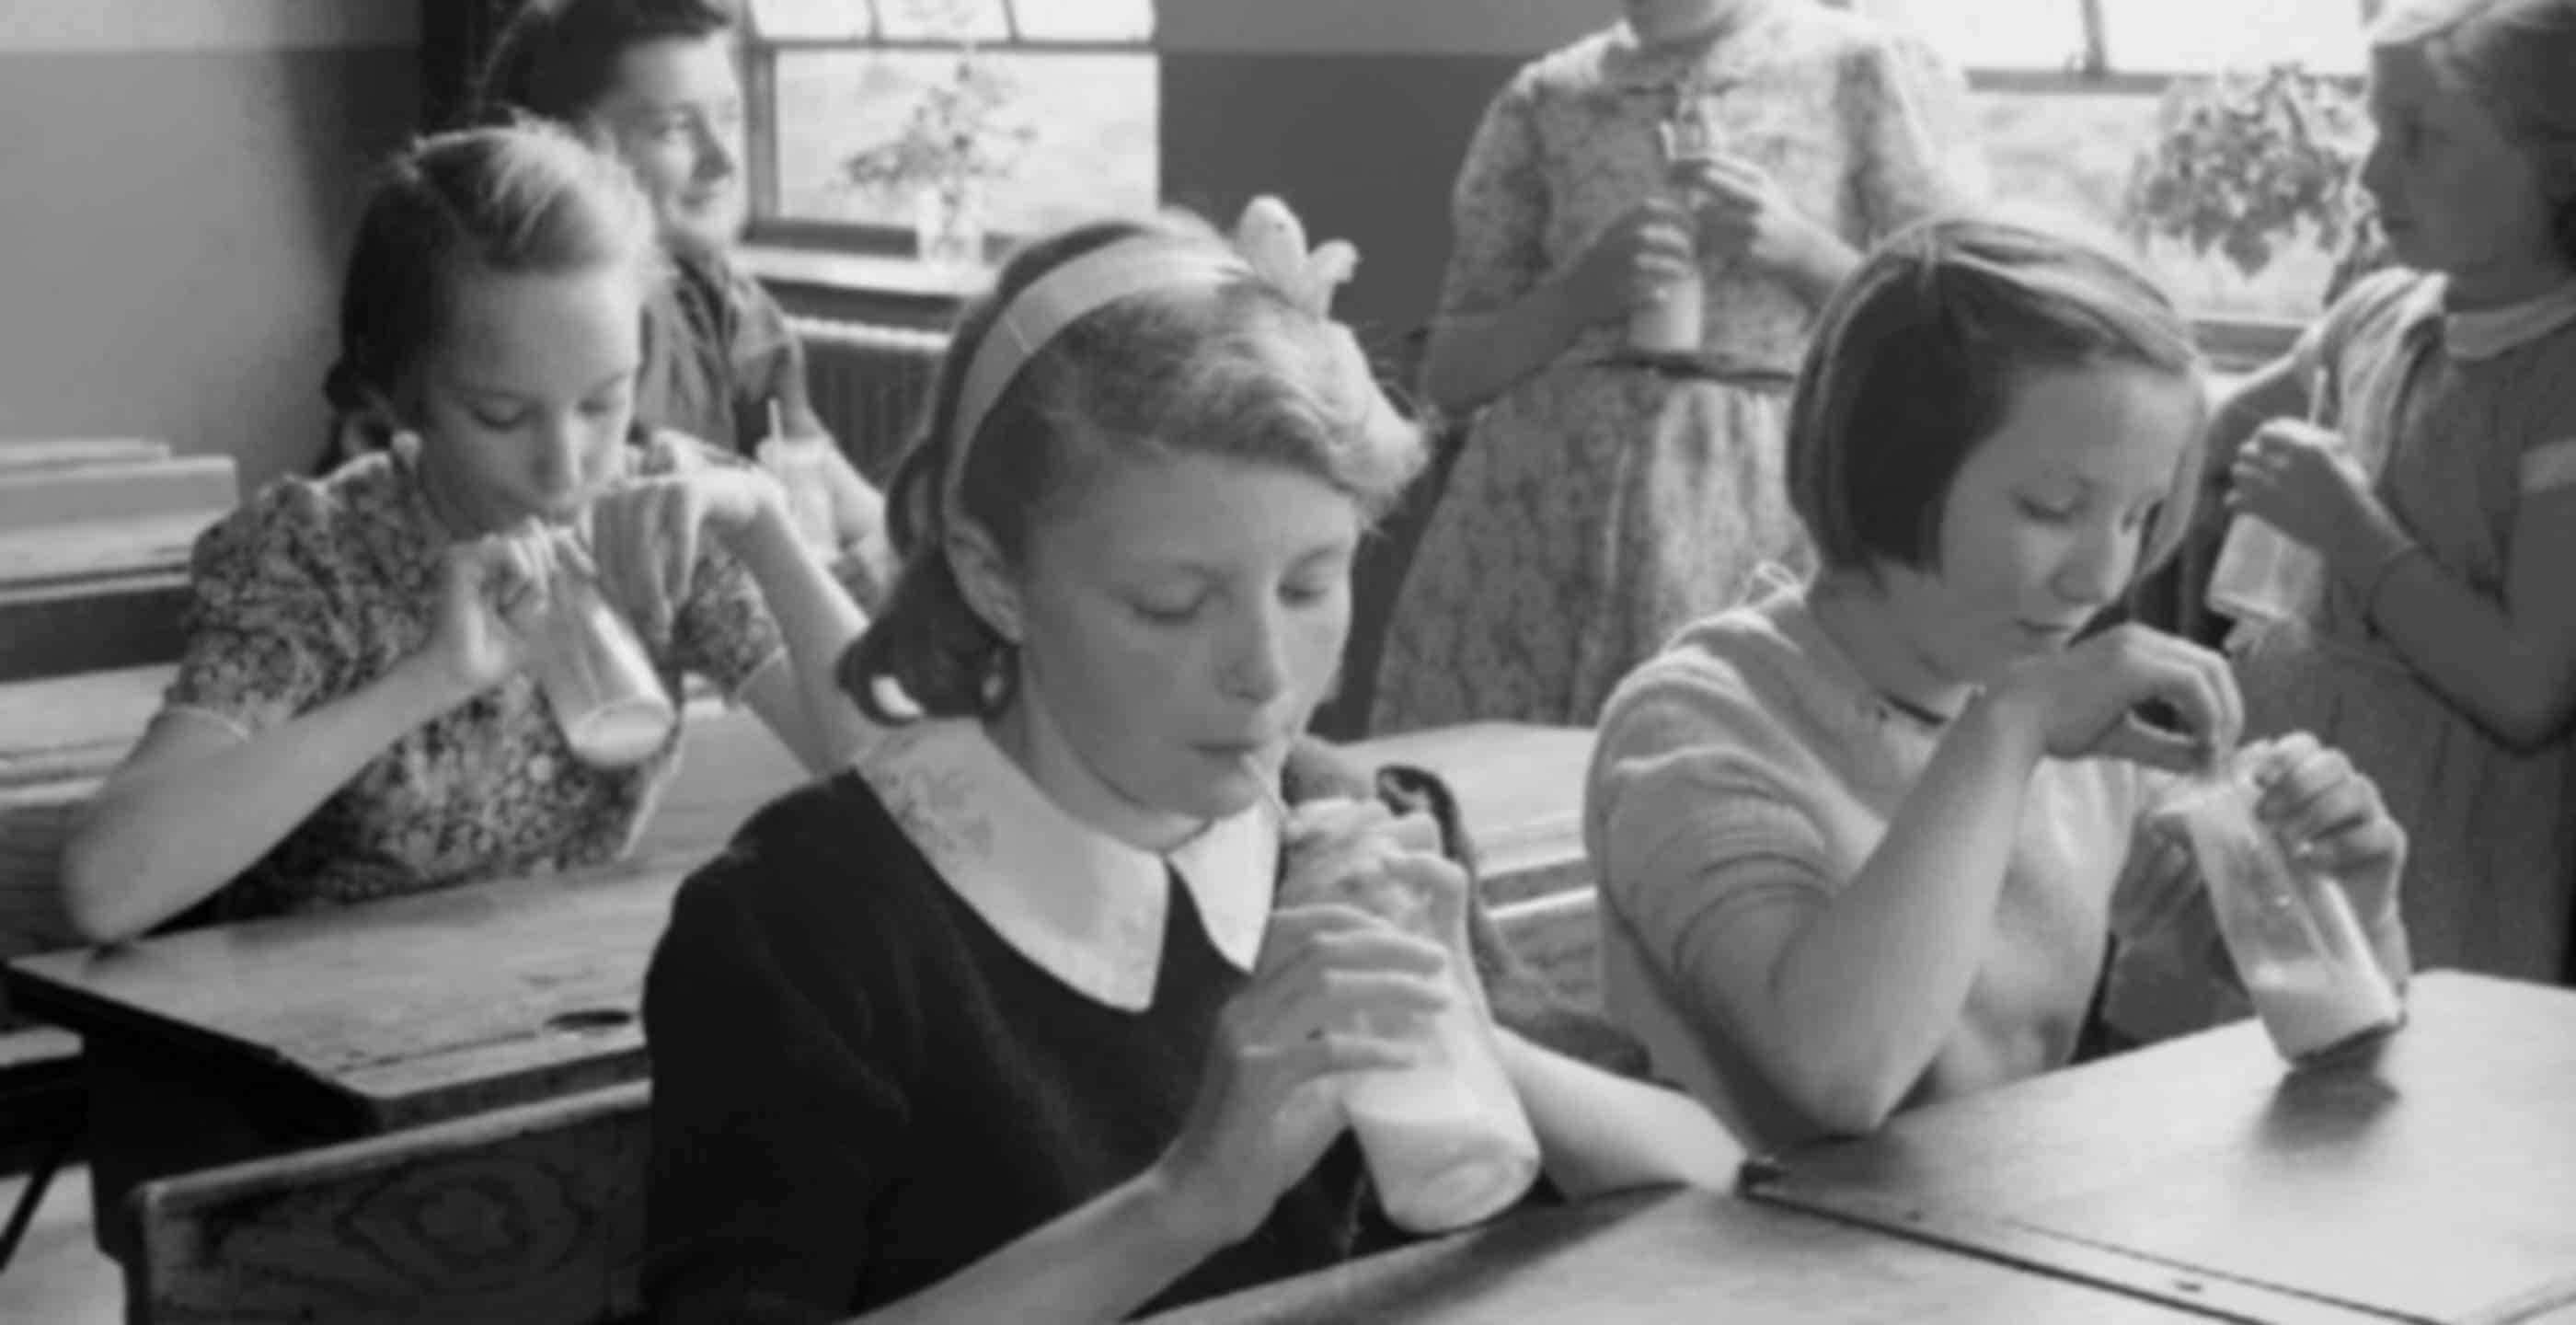 Life in England 1950s: Children Archive Footage